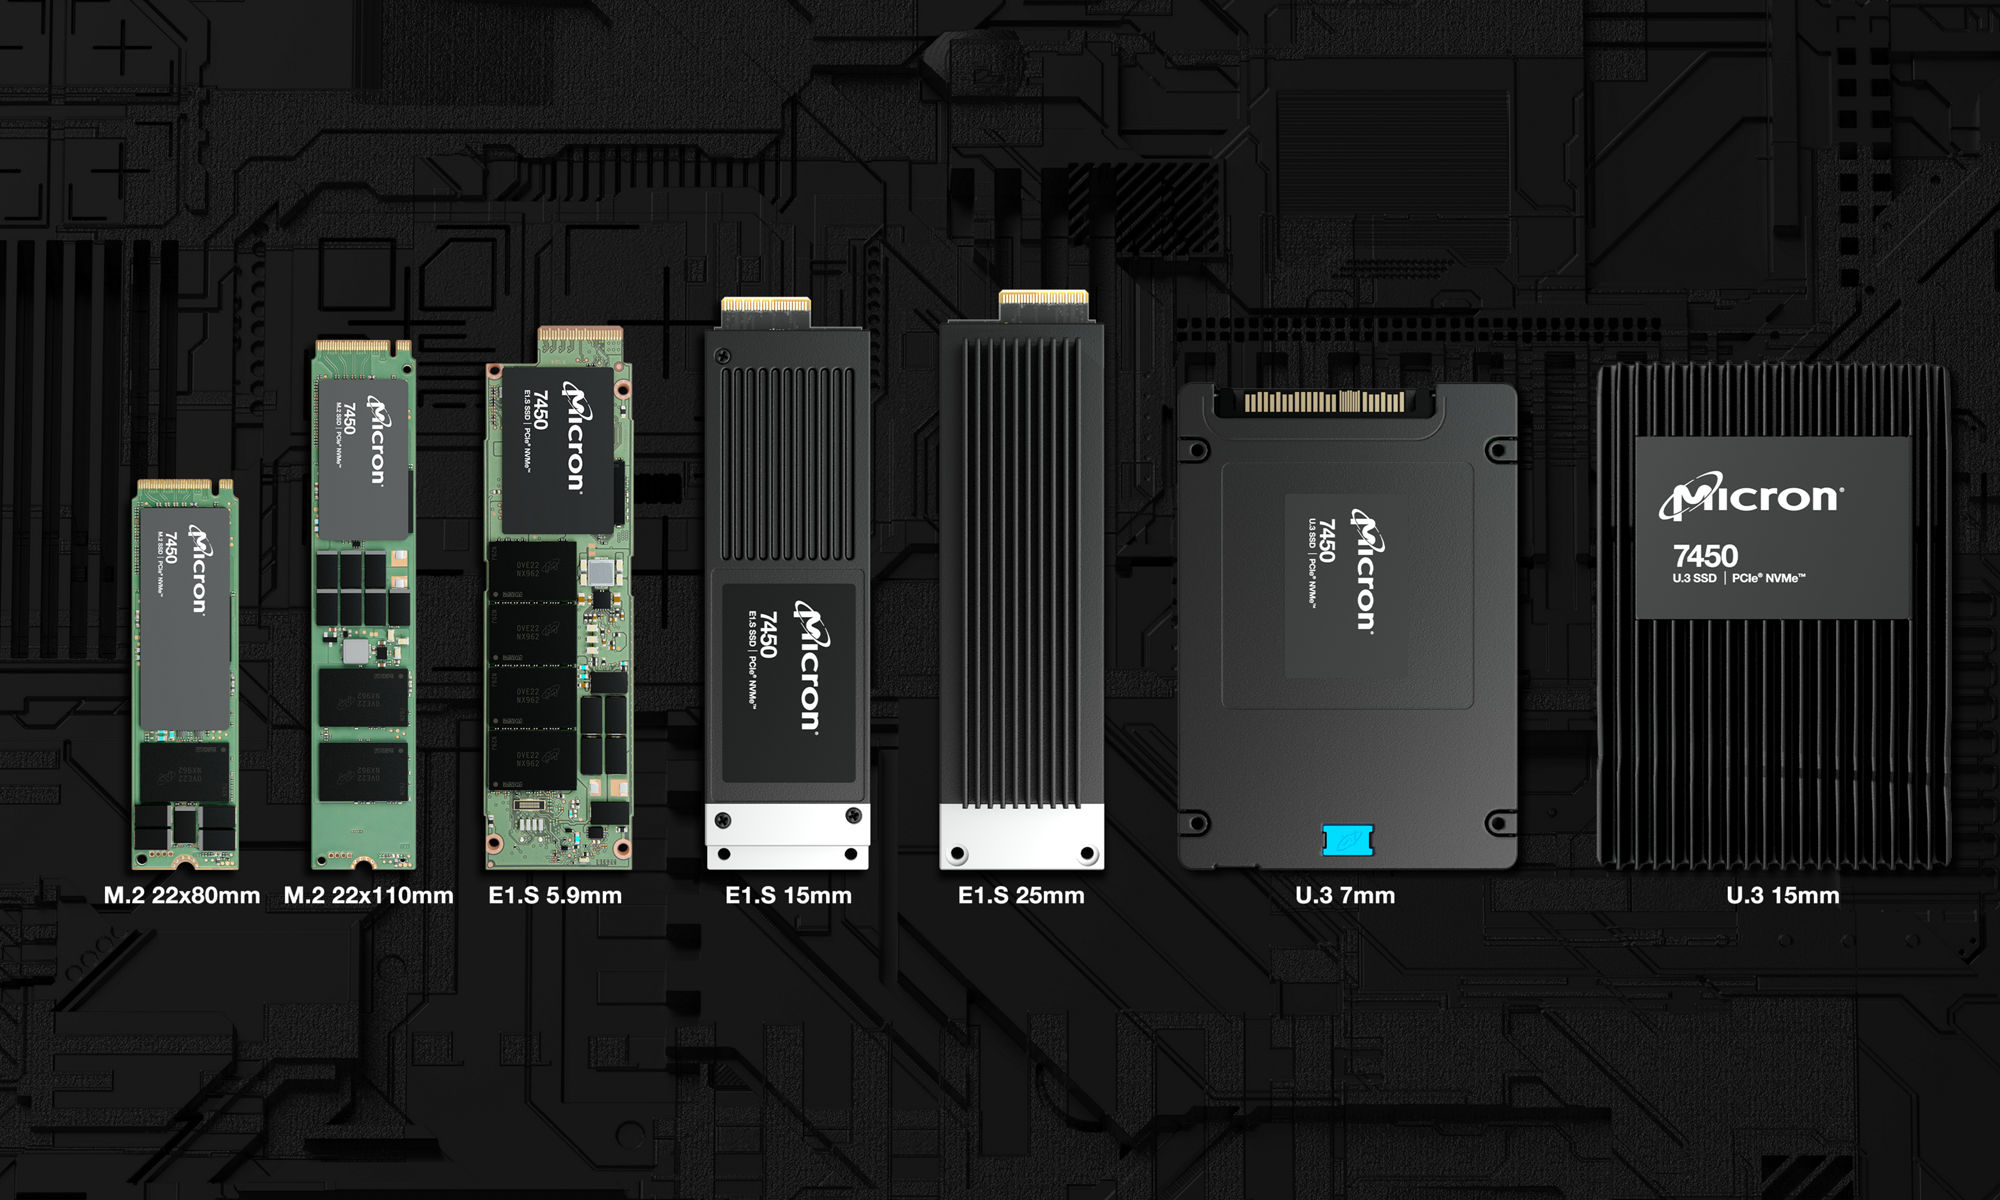 7450 SSD with NVMe Product Line